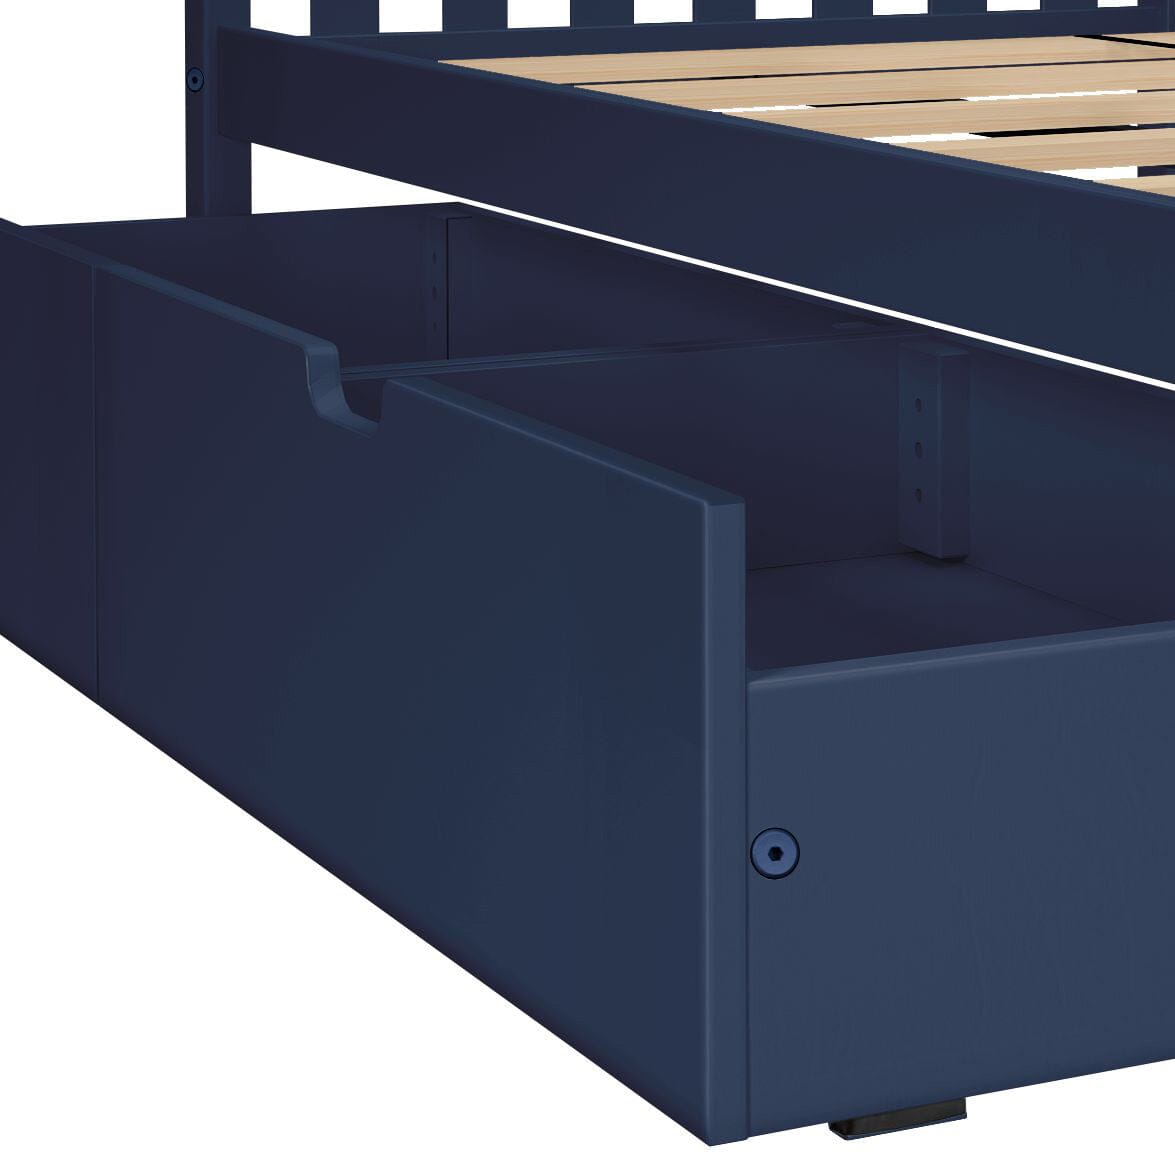 187231-131 : Bunk Beds Twin over Full Bunk Bed + Storage Drawers, Blue